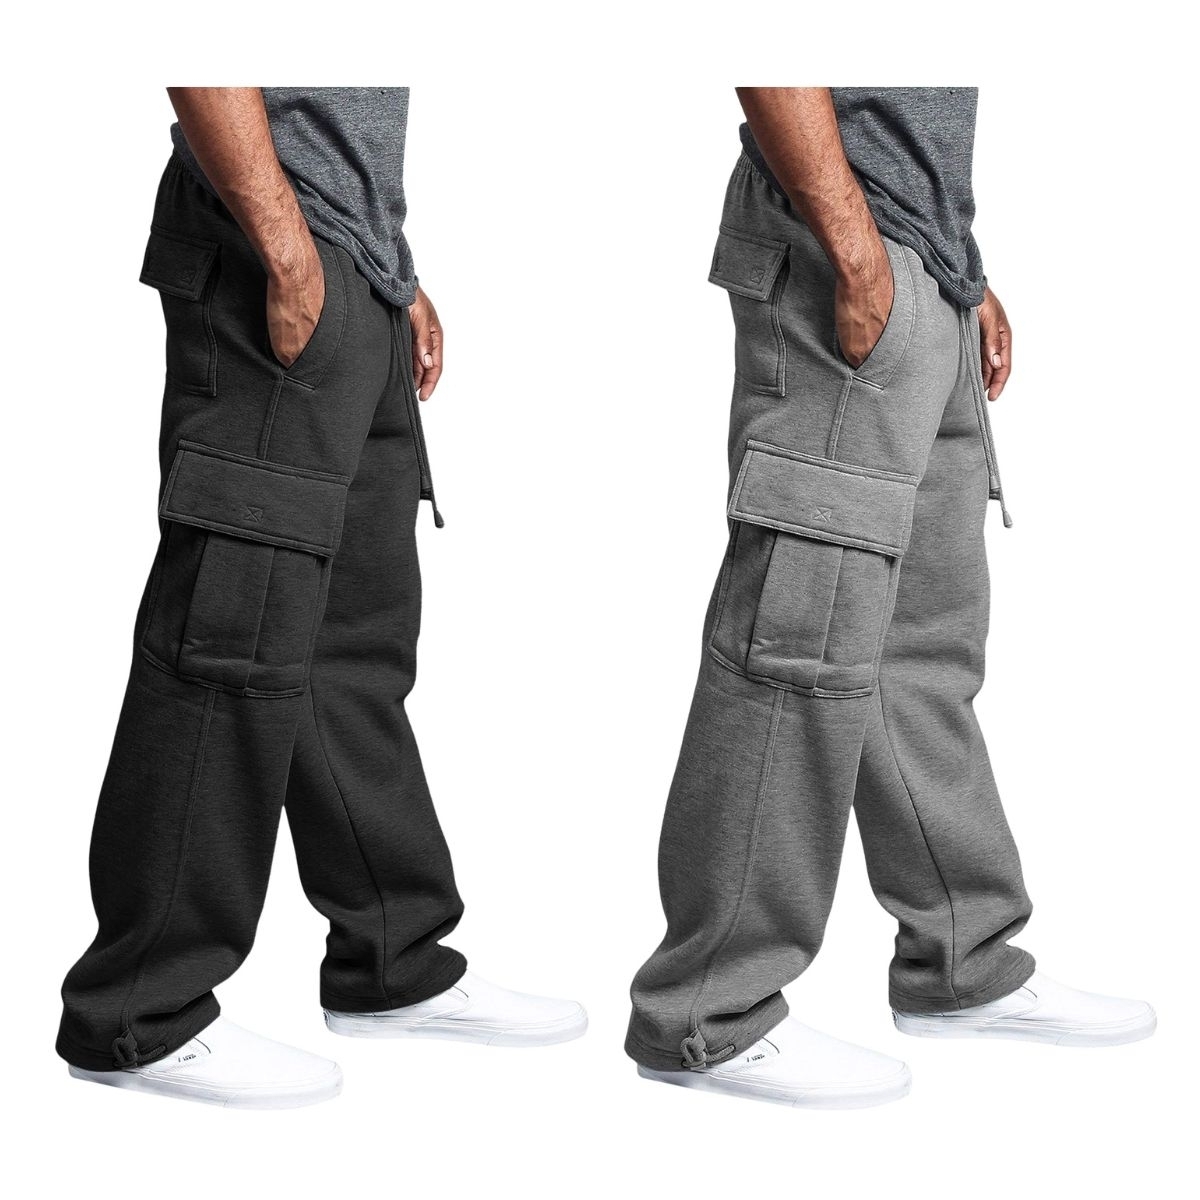 2-Pack: Men's Casual Solid Fleece Lined Cargo Jogger Soft Sweatpants With Pockets - Black&navy, Small